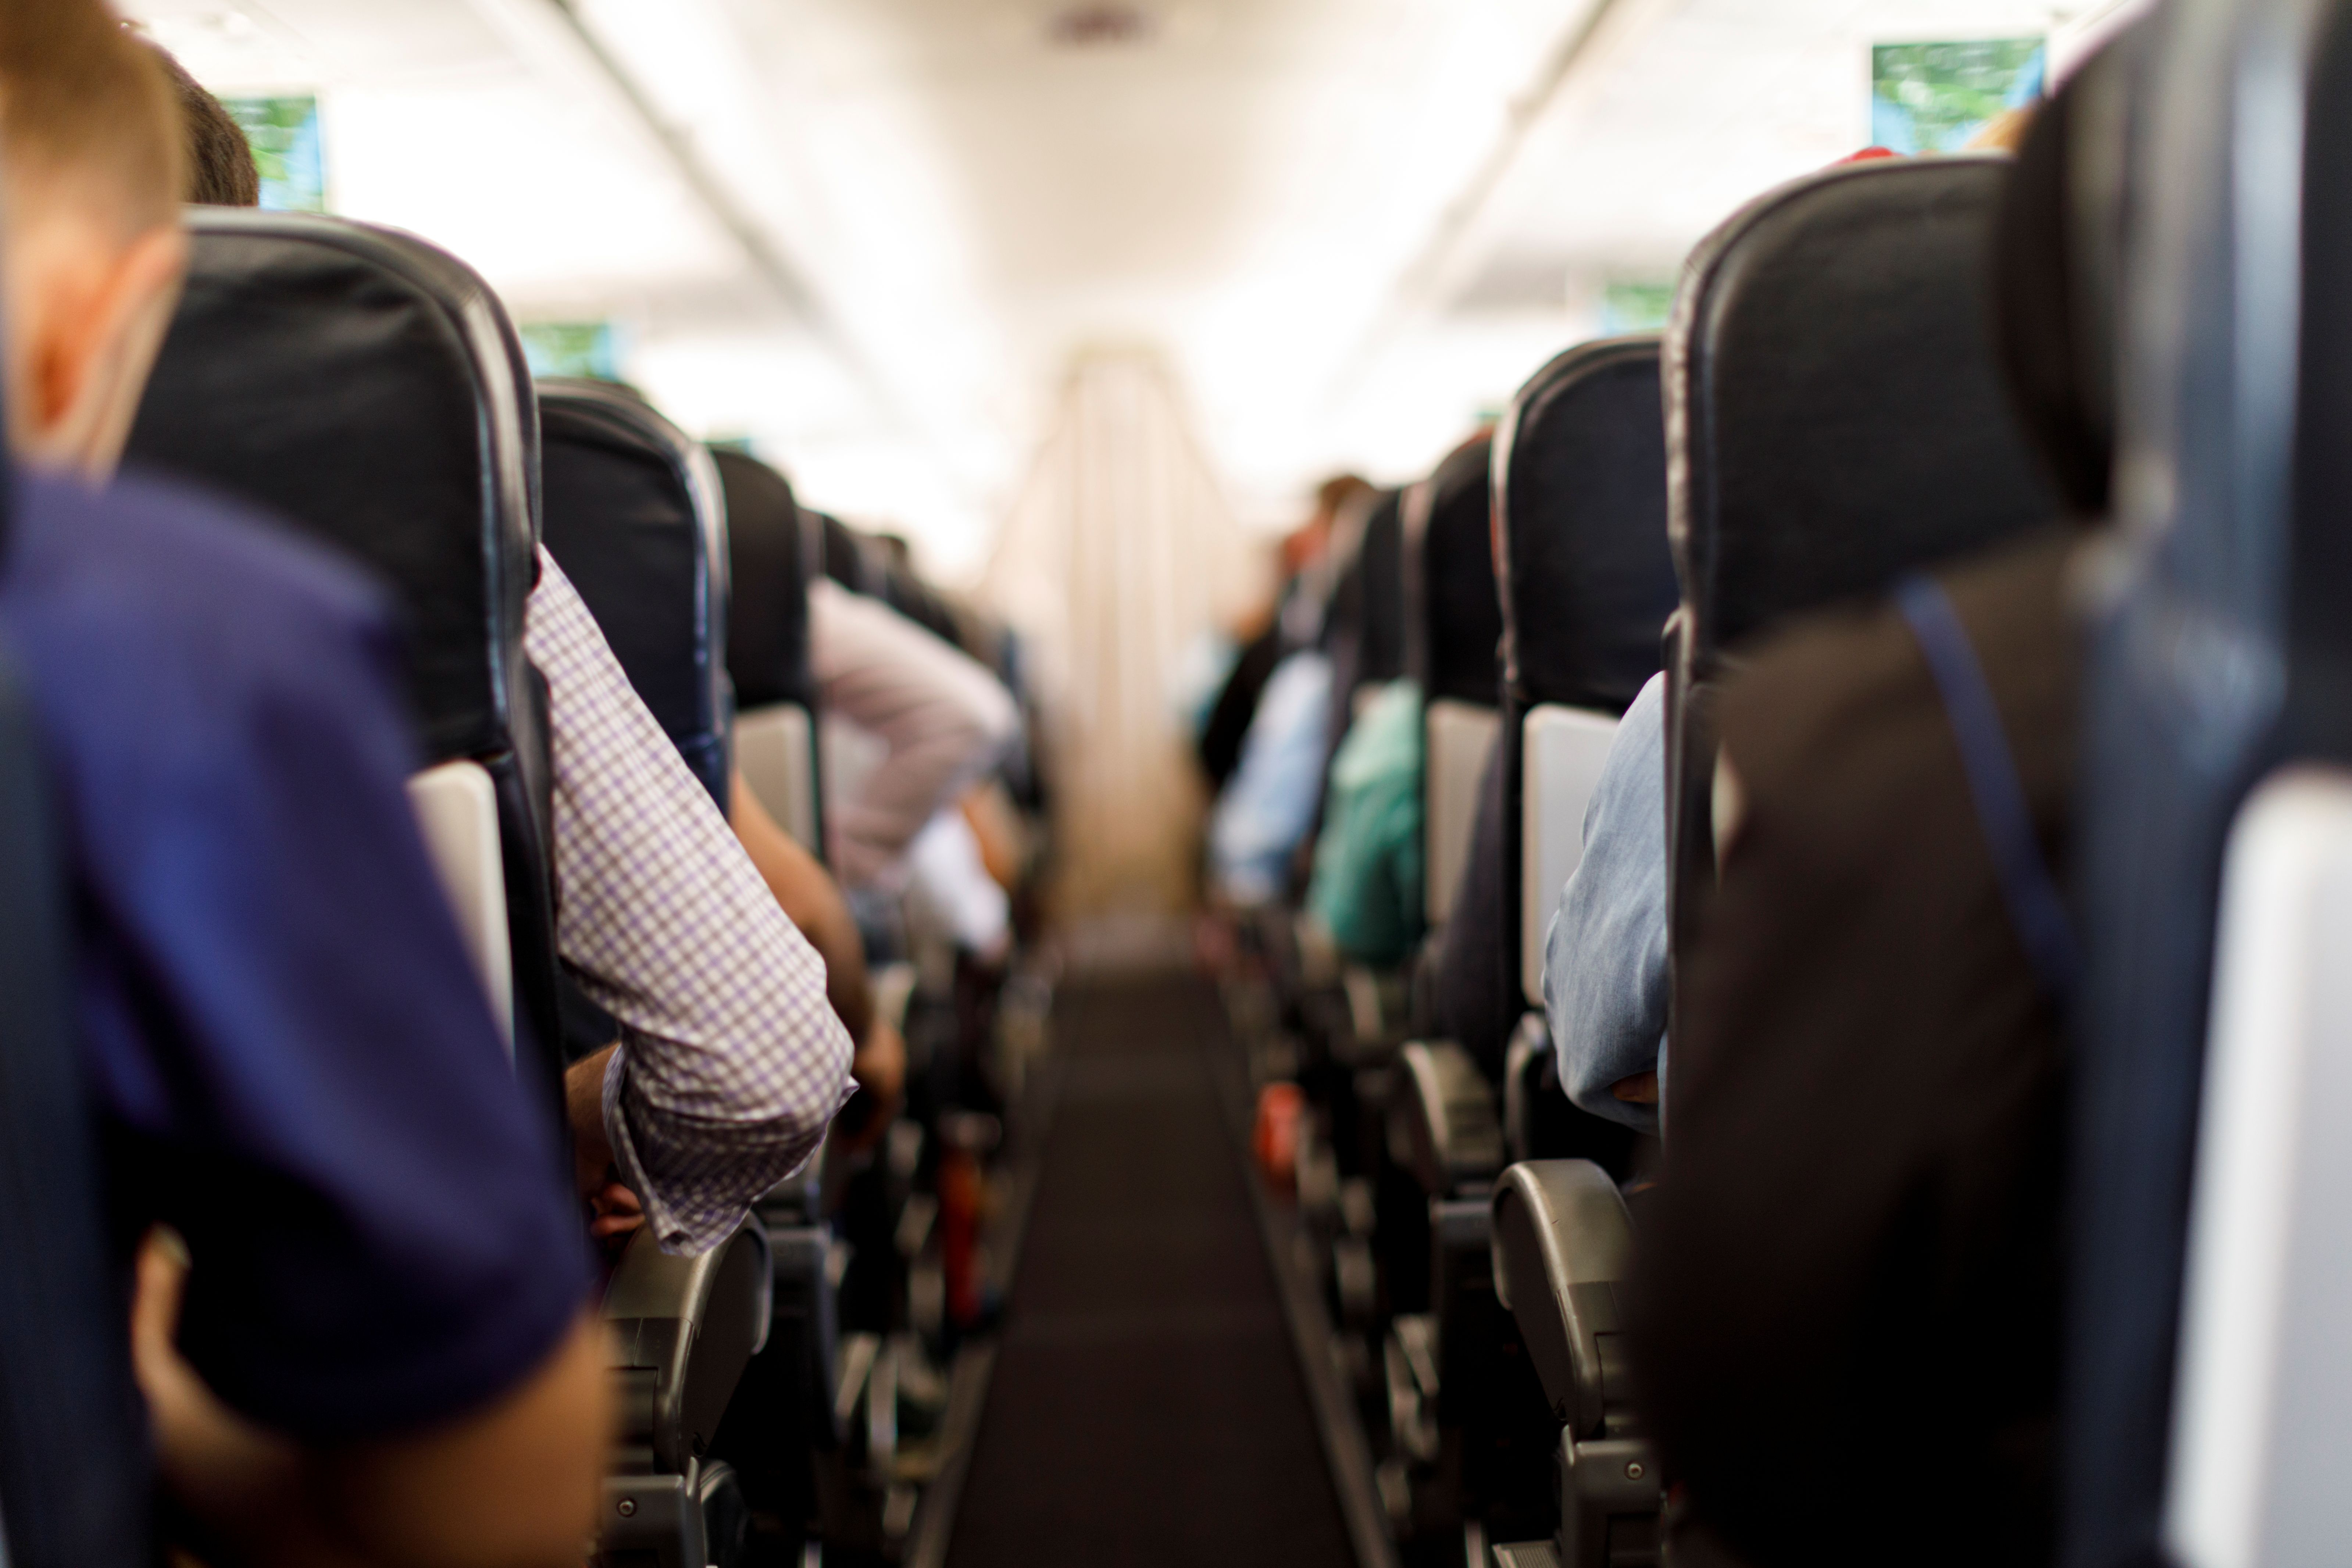 Airline seat sizes shrinking